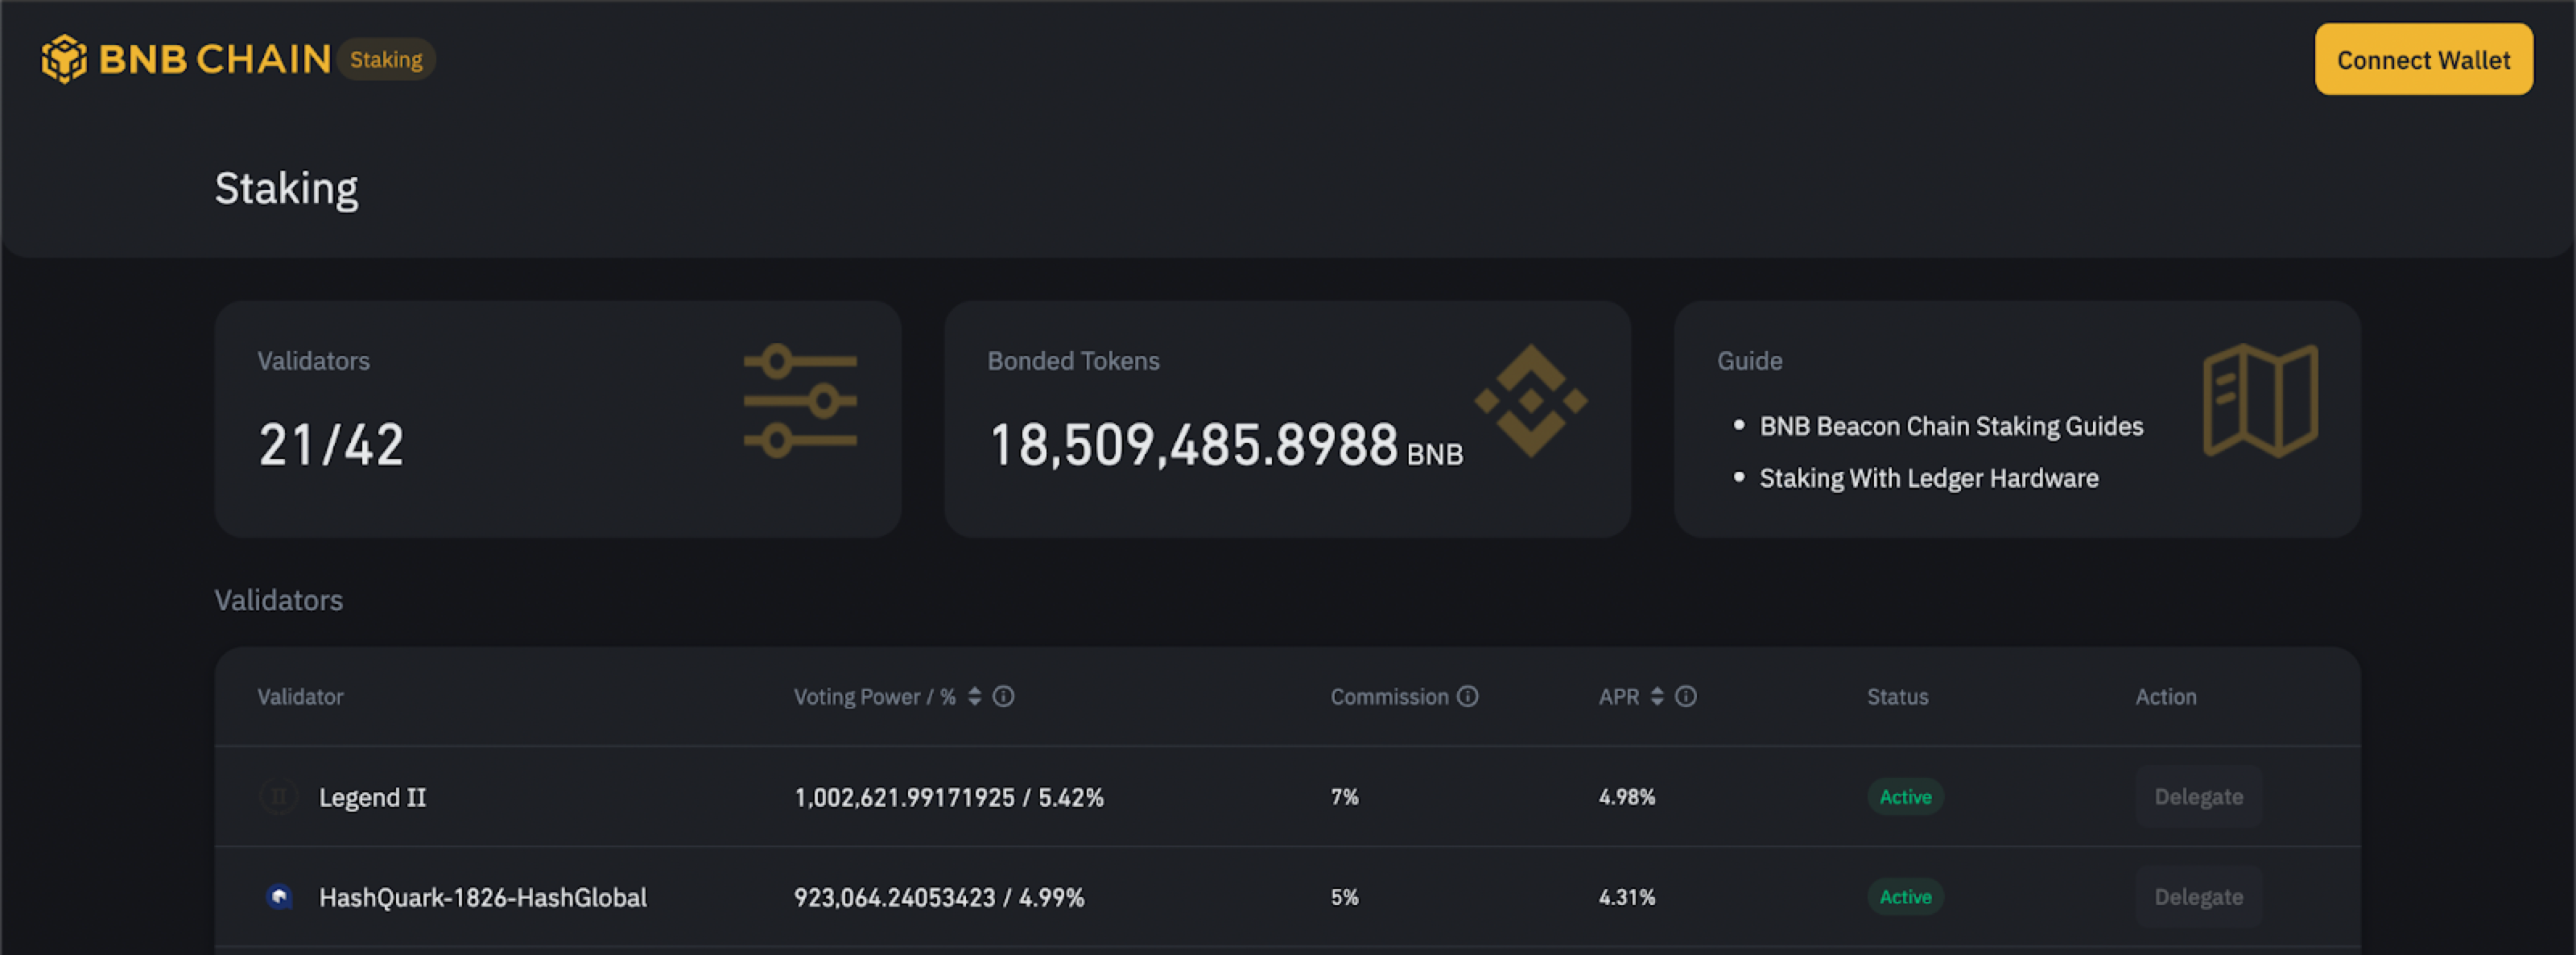 How To Stake BNB | A Beginner’s Guide to Staking Binance Coin